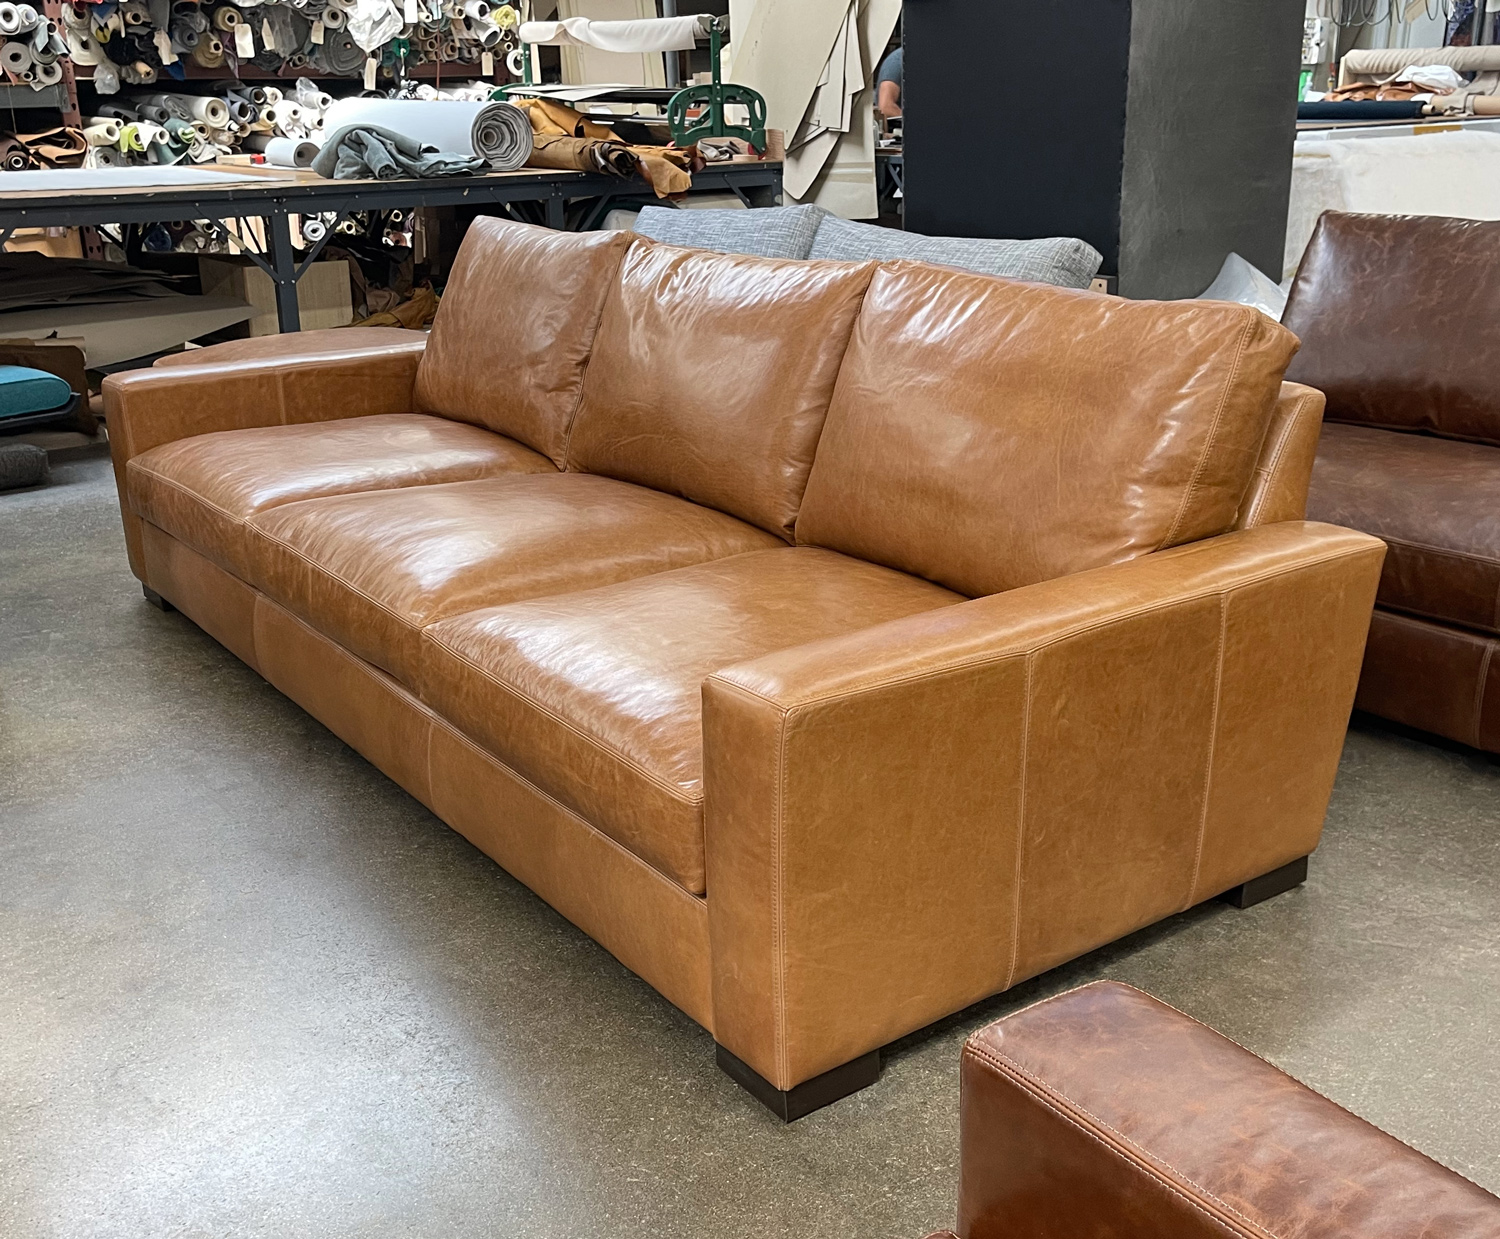 Braxton 108" x 46" Sofa in Mont Blanc Sycamore Leather - front angle view